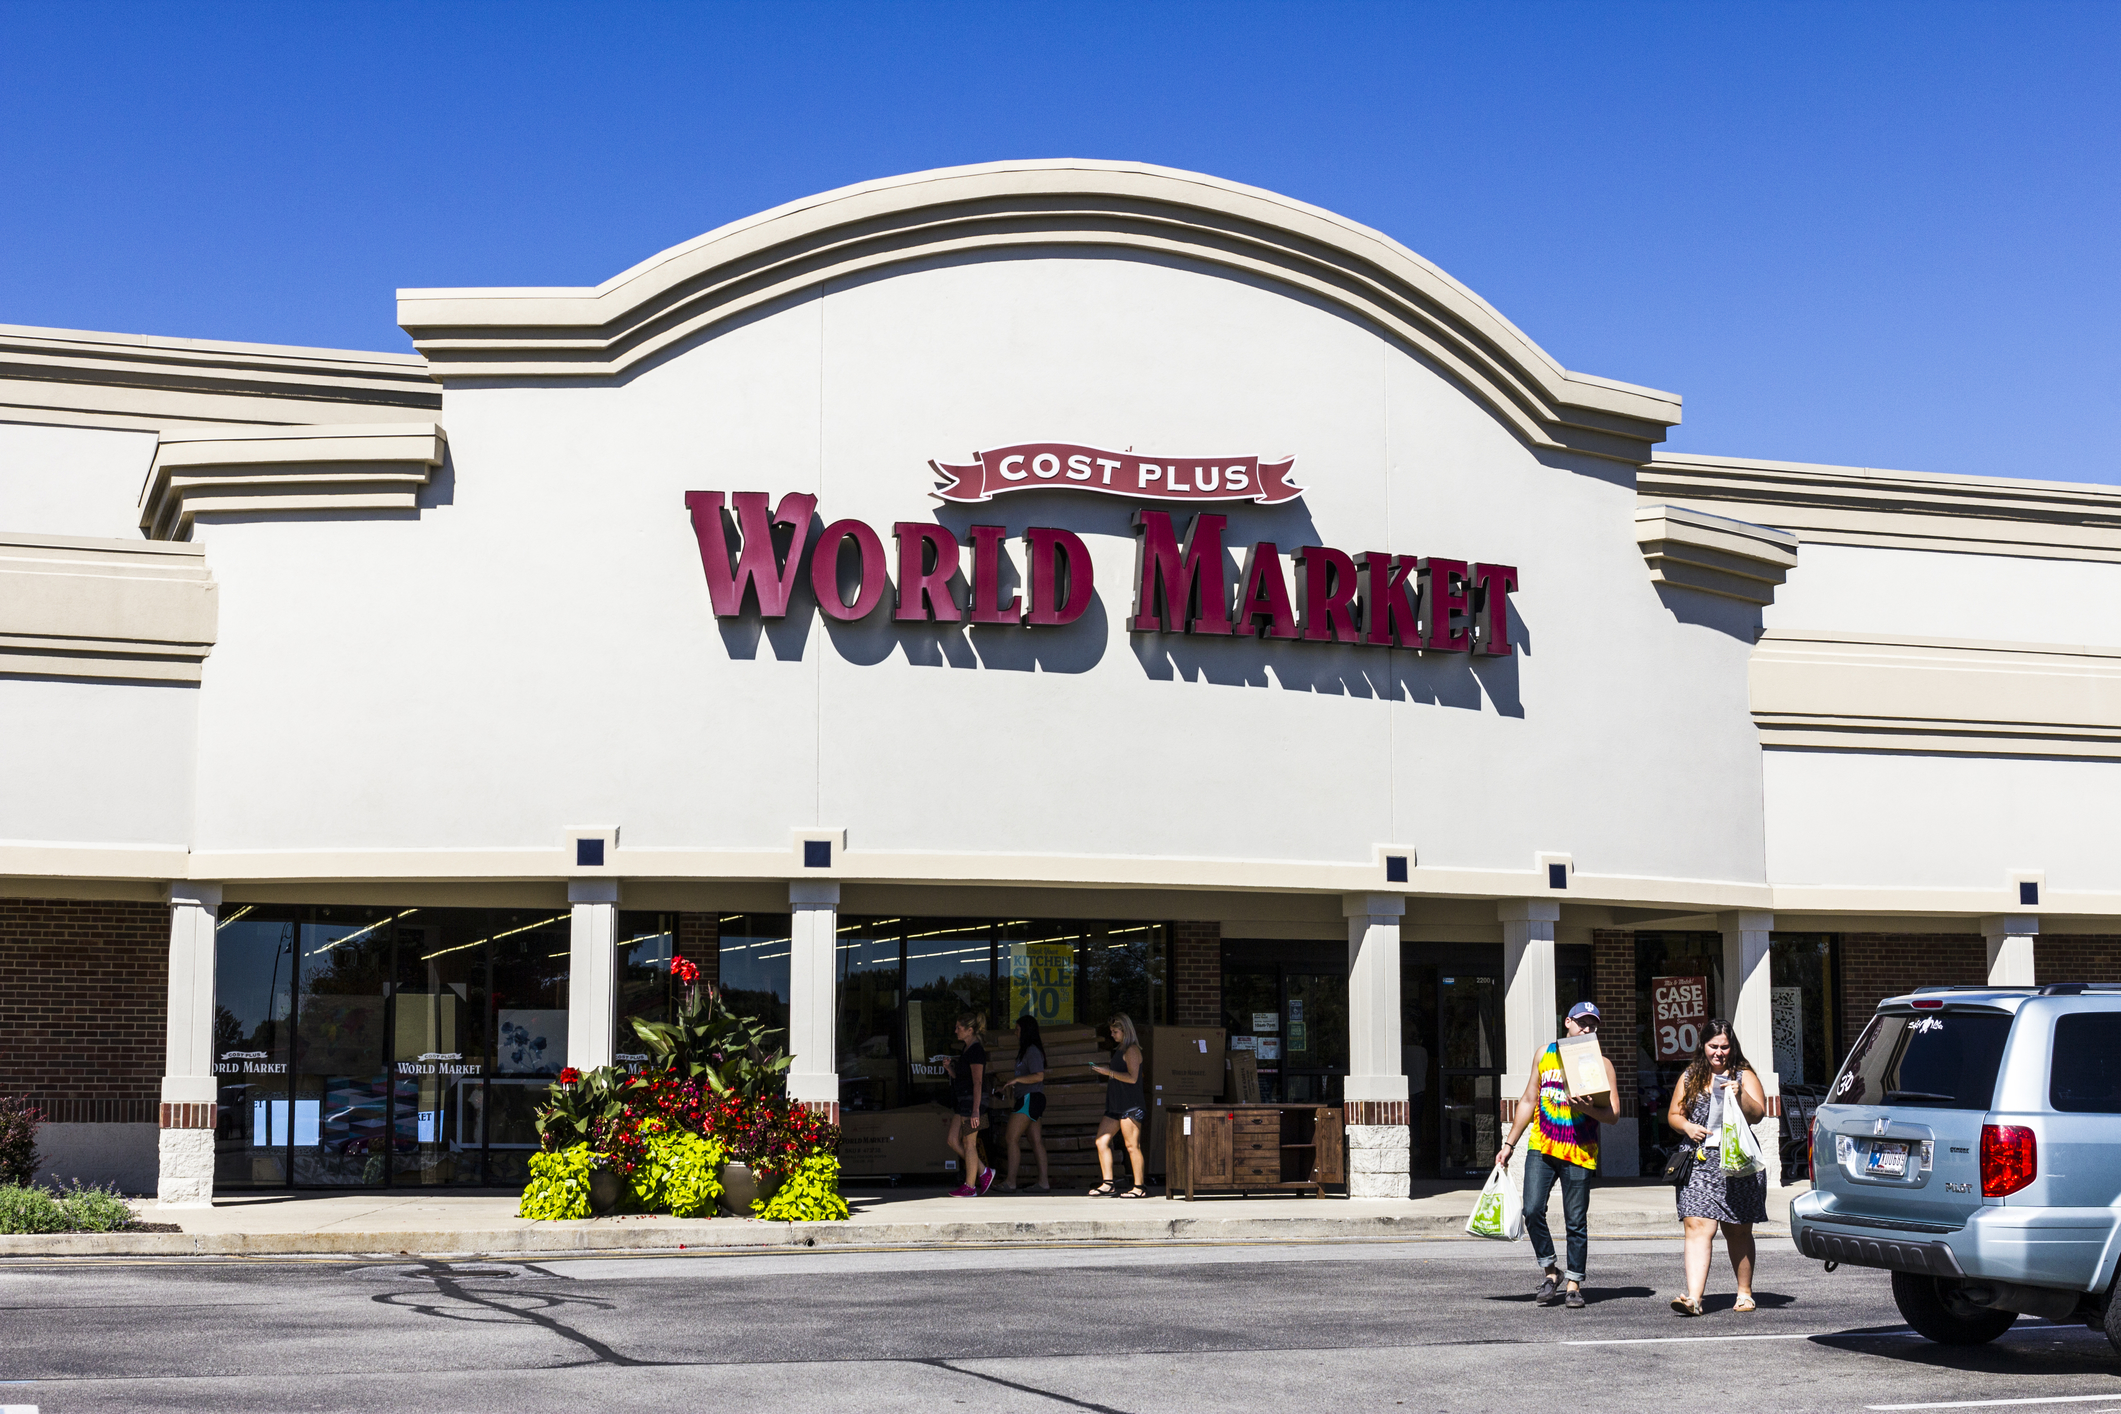 14 ways to save at Cost Plus World Market